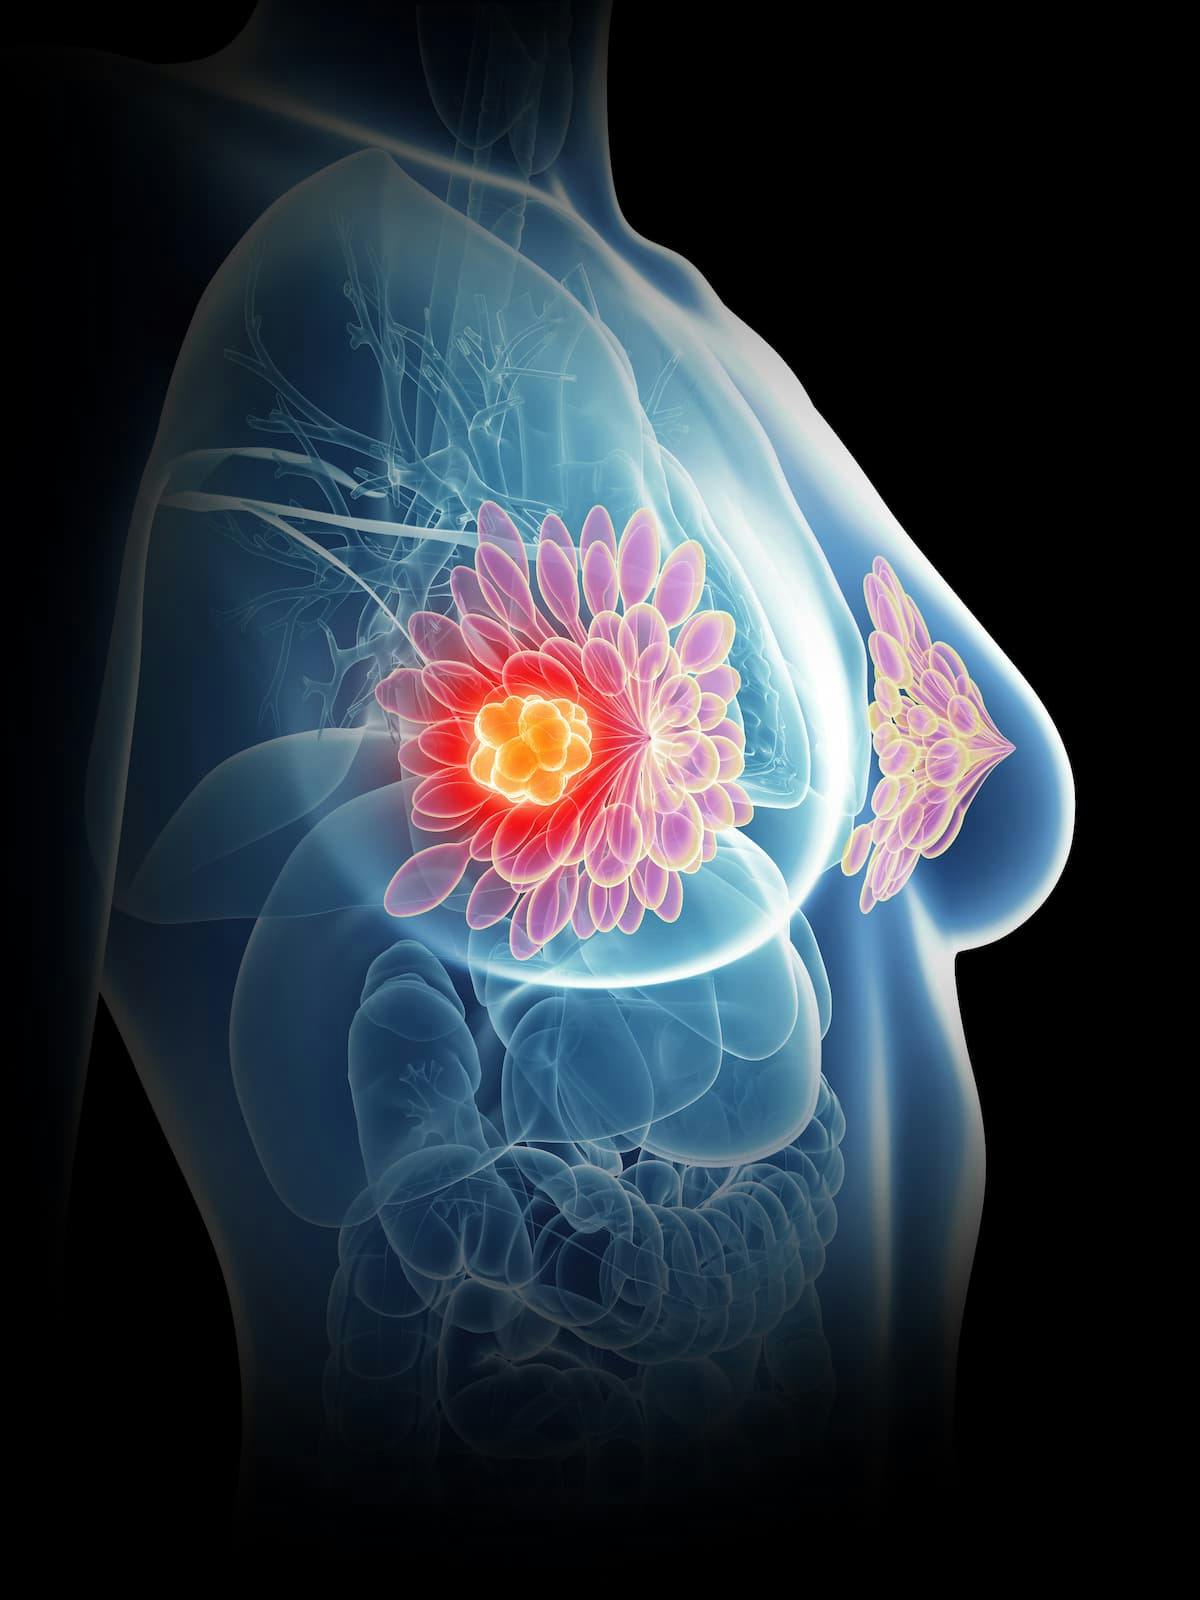 Interim data from the phase 1/2 TACTIC-2 trial indicated that treatment with TAC01-HER2 cell therapy produced a 67% disease control rate among a cohort of patients with HER2-positive solid tumors.